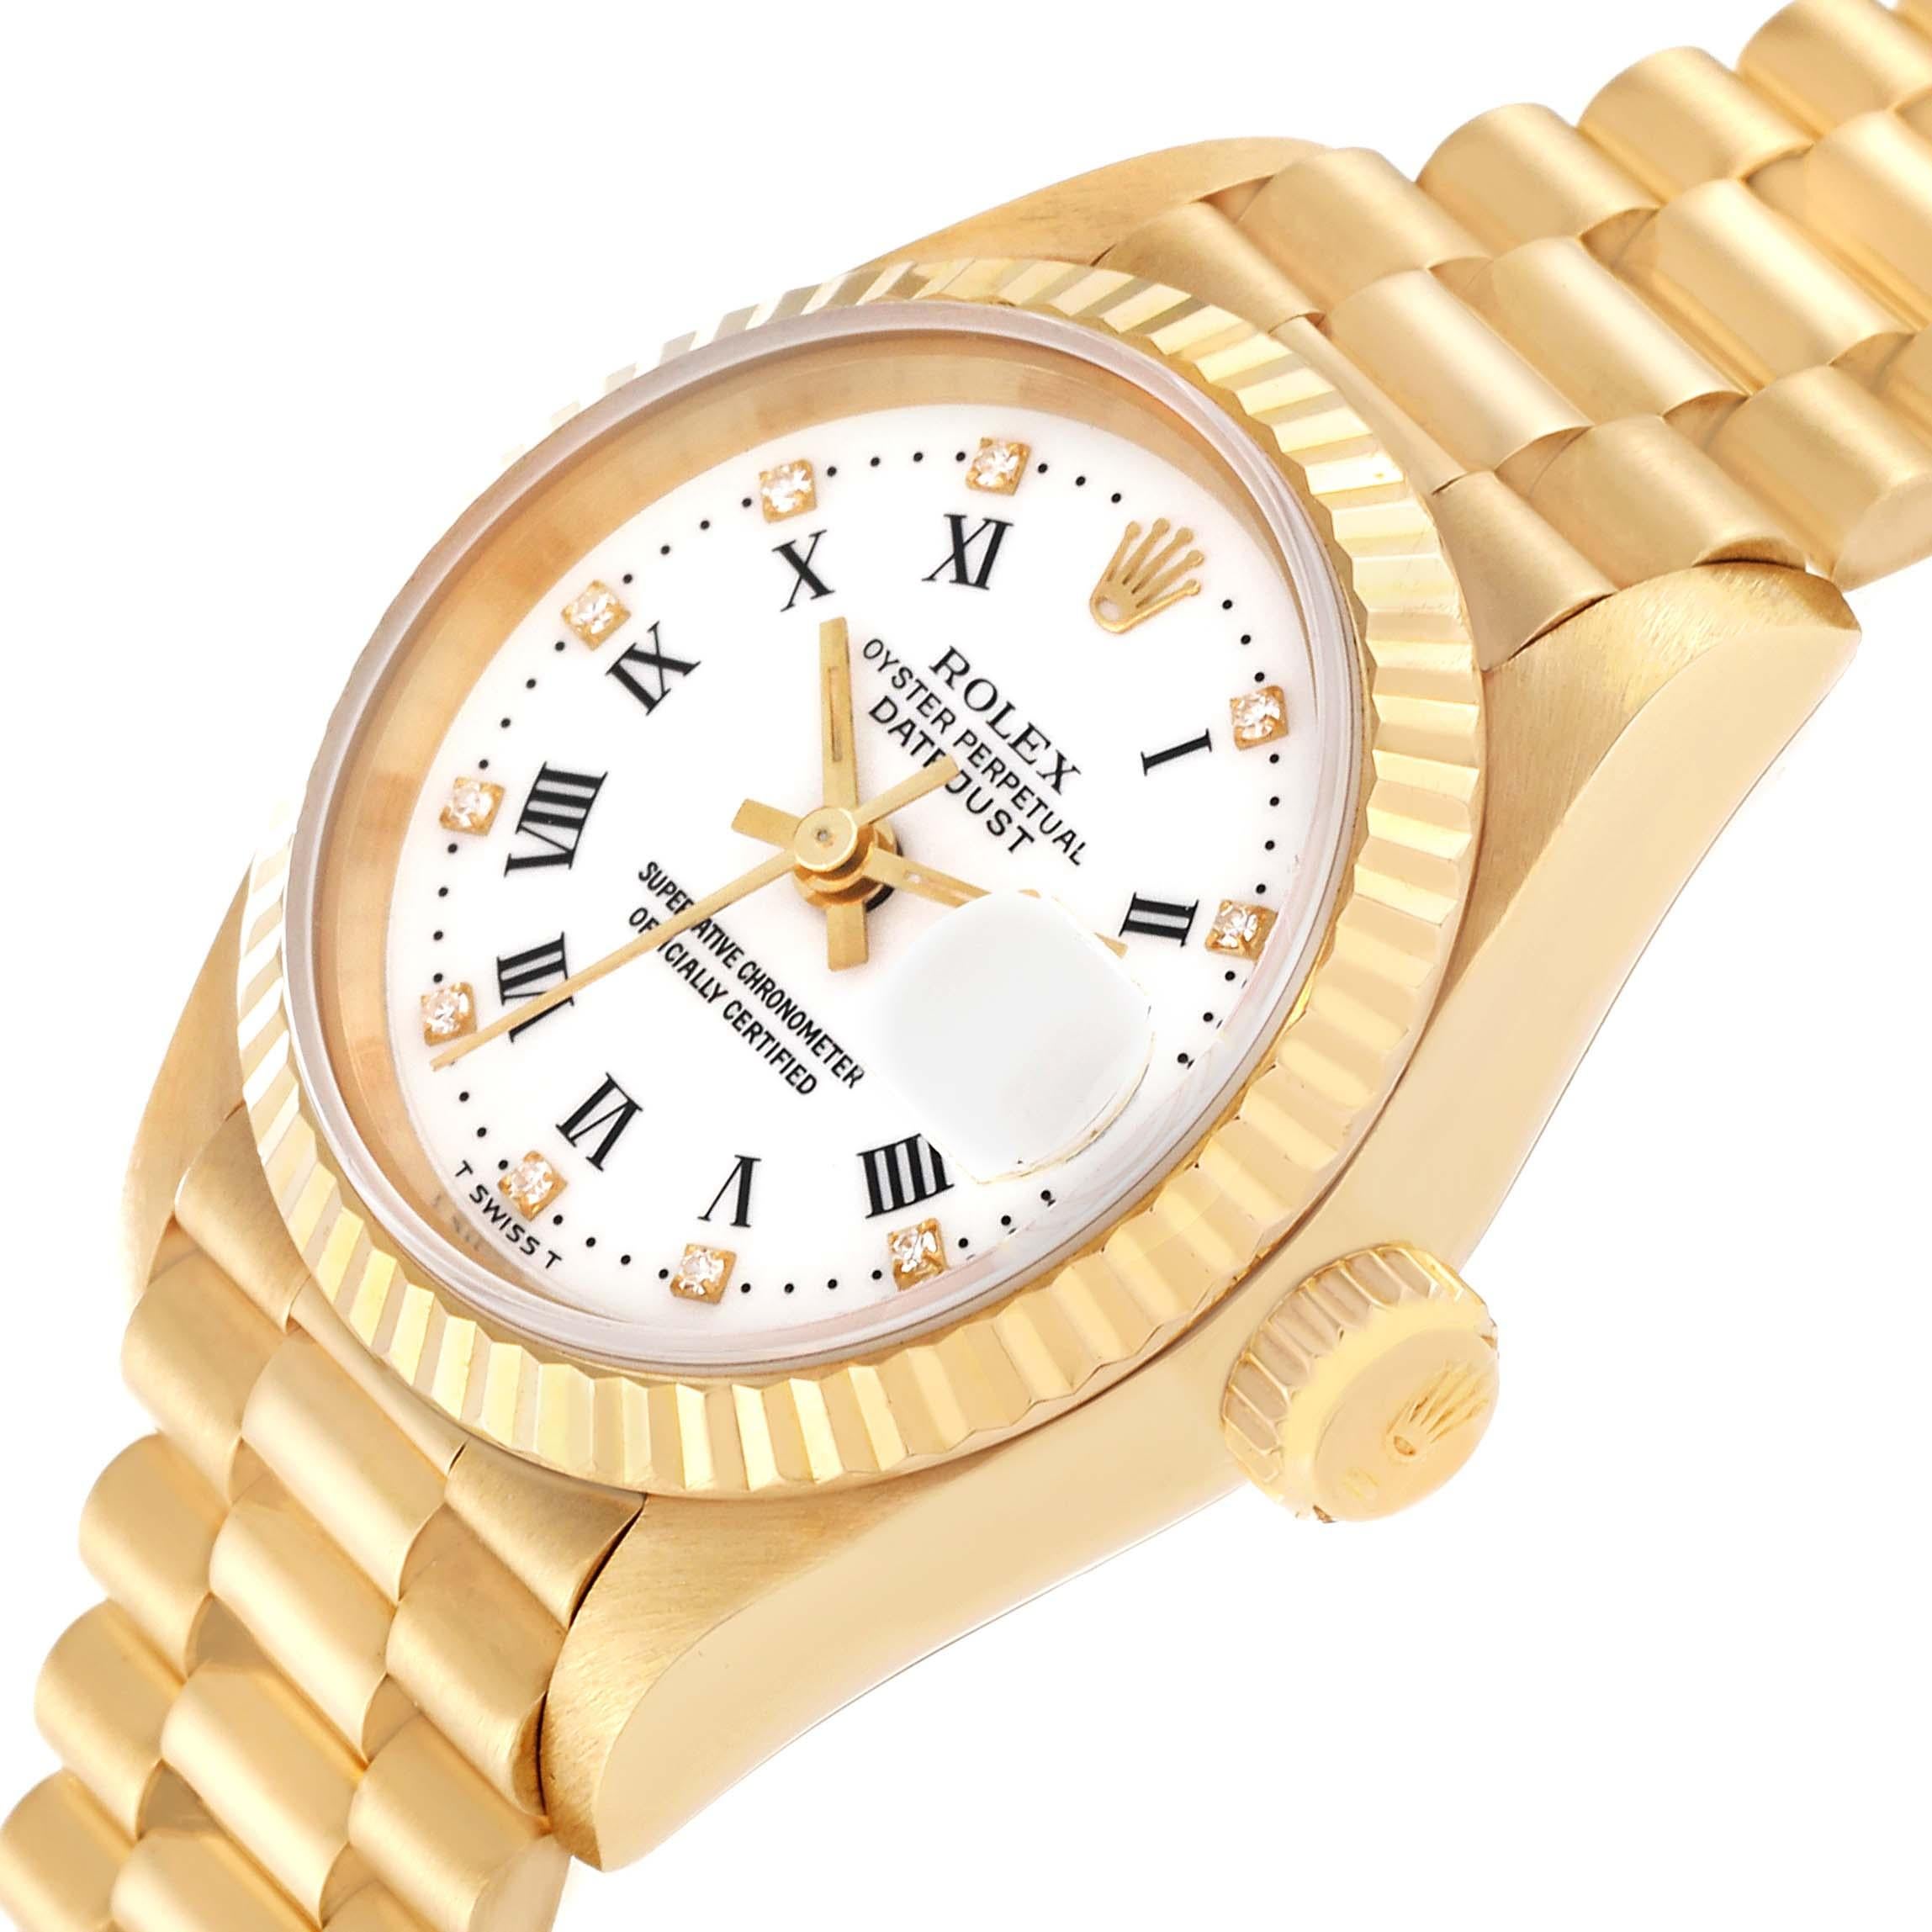 Women's Rolex Datejust President Diamond Dial Yellow Gold Ladies Watch 69178 Box Papers